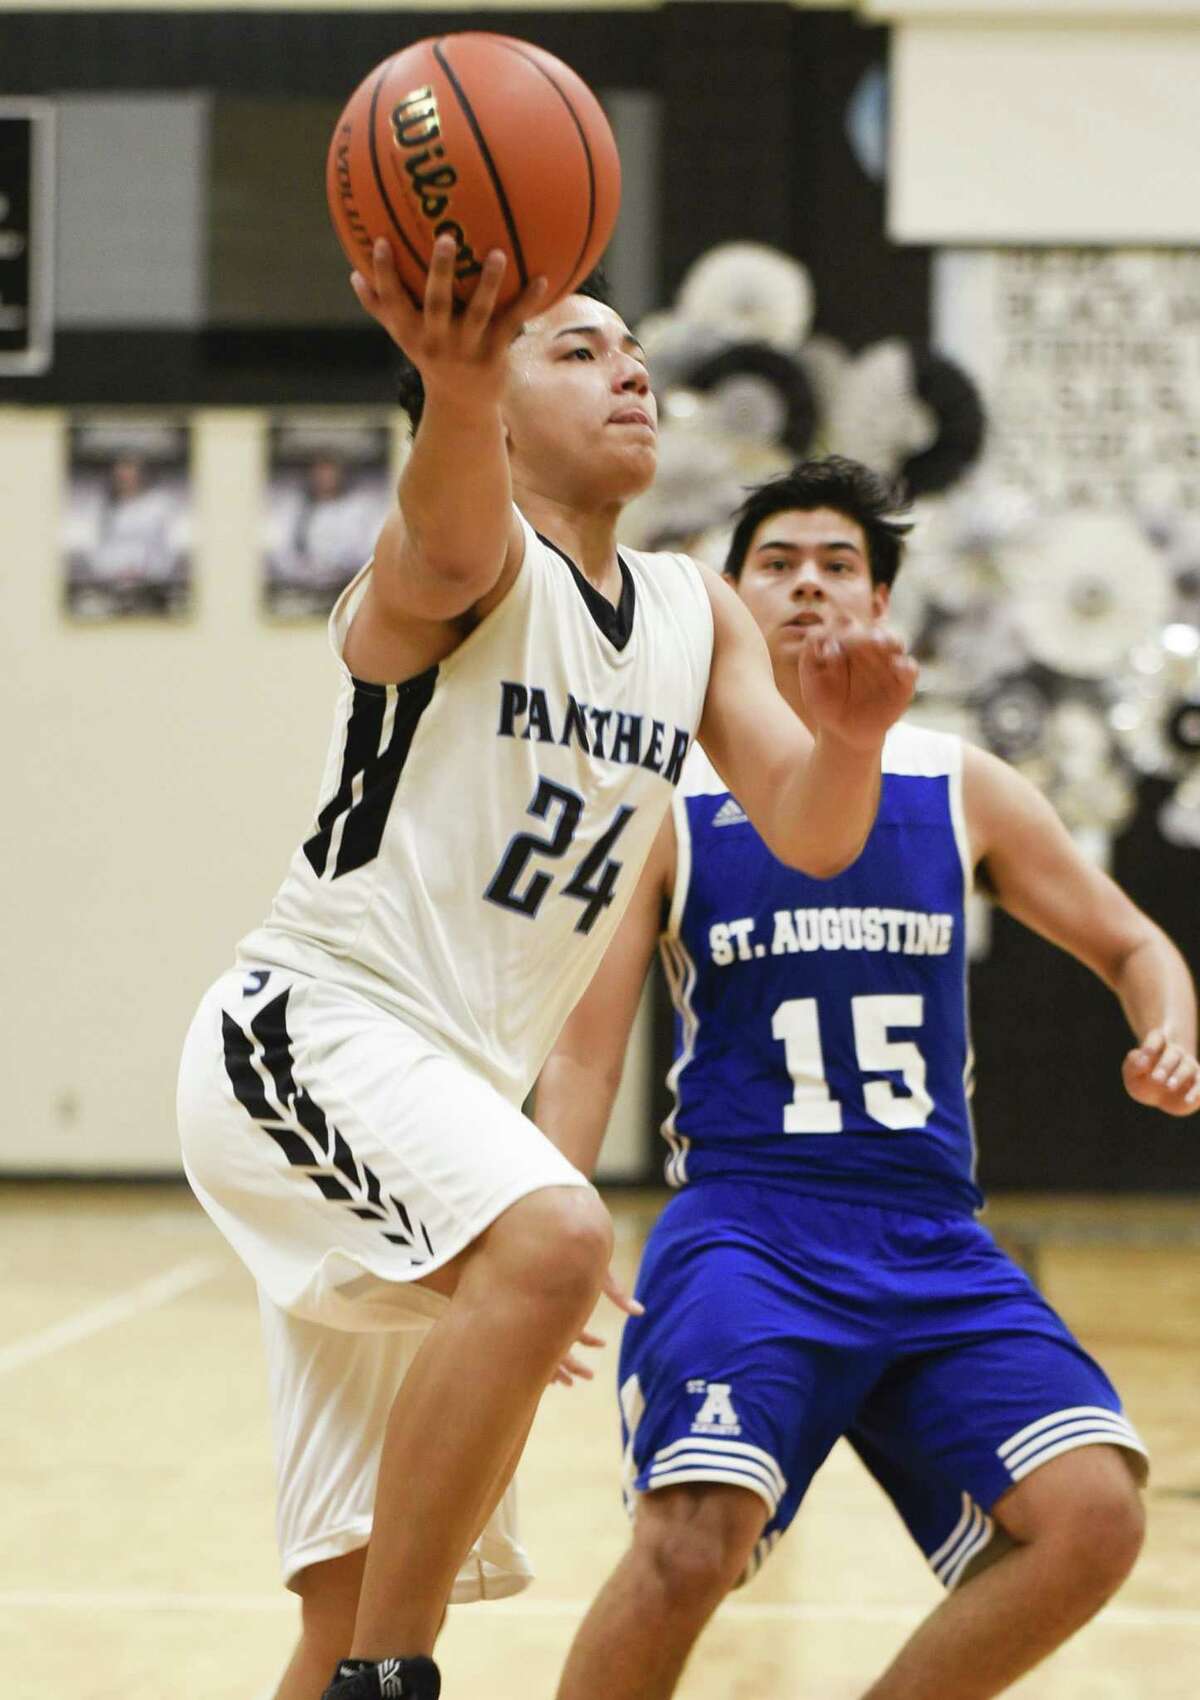 Jesus Trevino and the Panthers defeated the Knights 83-47 Saturday. Trevino had 13 points in the win.